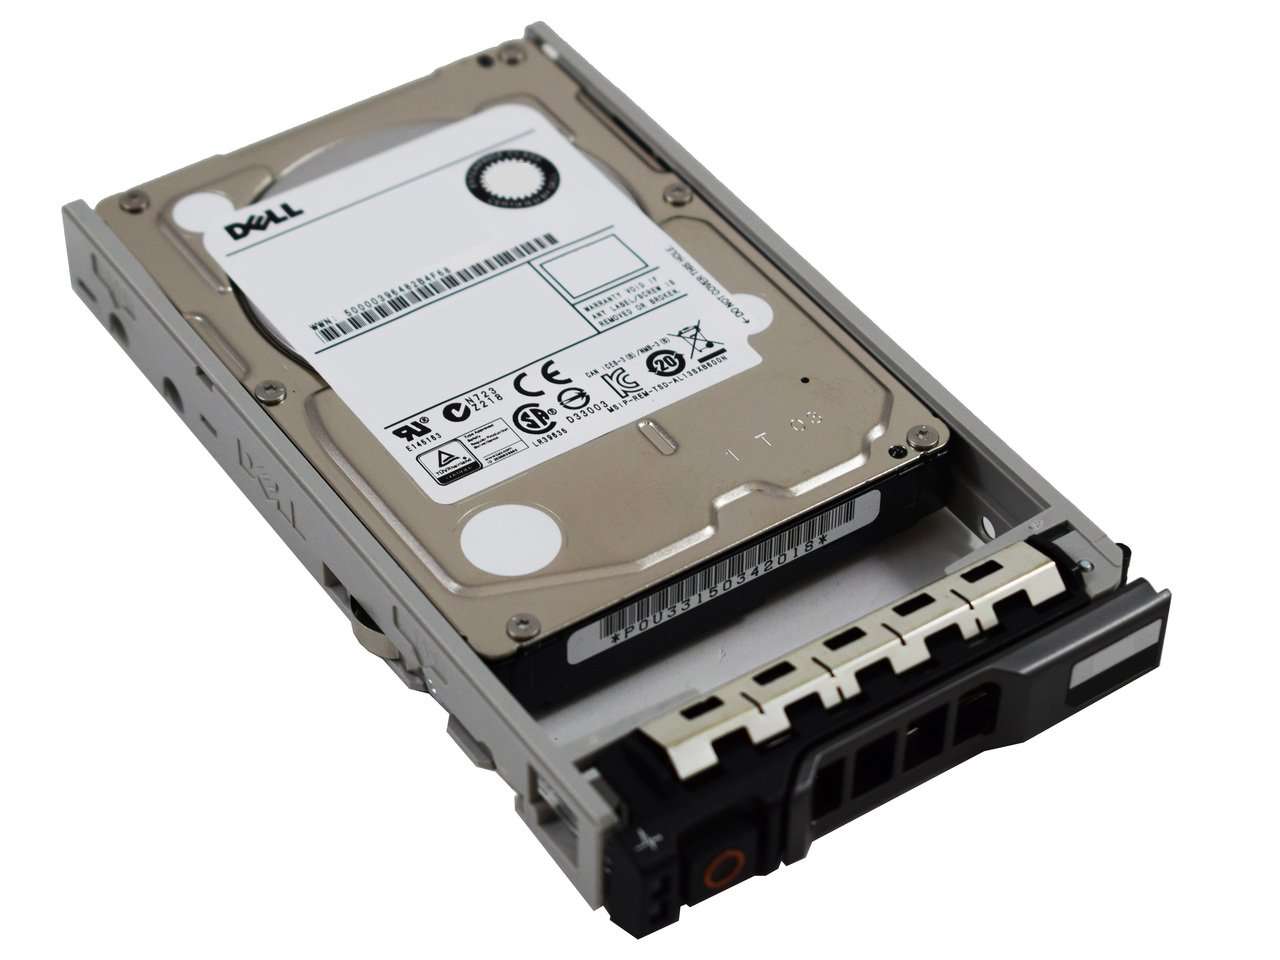 Dell G13 342-2319 600GB 10K RPM SAS 6Gb/s 512n 2.5" Manufacturer Recertified HDD